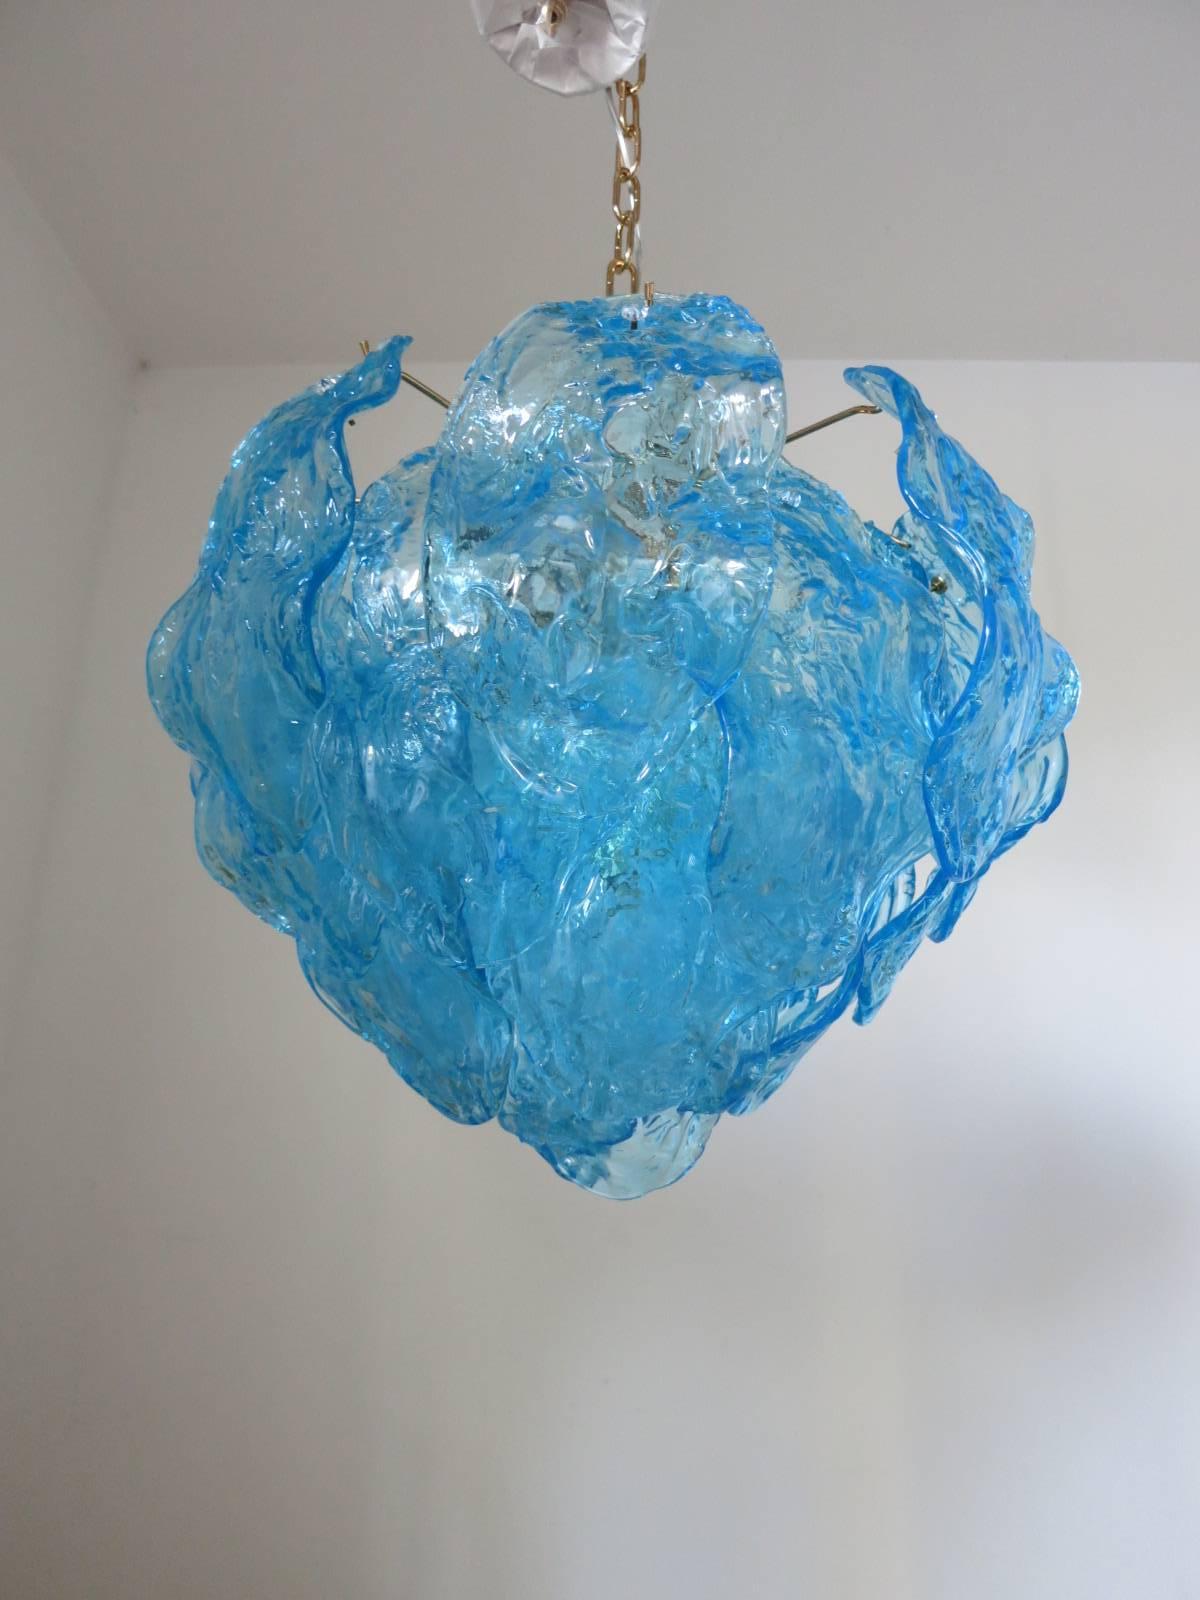 Italian vintage chandelier with hand blown aqua blue Murano glass leaves, mounted on a brass frame / Designed by Mazzega circa 1960’s / Made in Italy 
4 lights / E26 or E27 type / max 60W each
Diameter: 19 inches / Height: 16 inches plus chain and